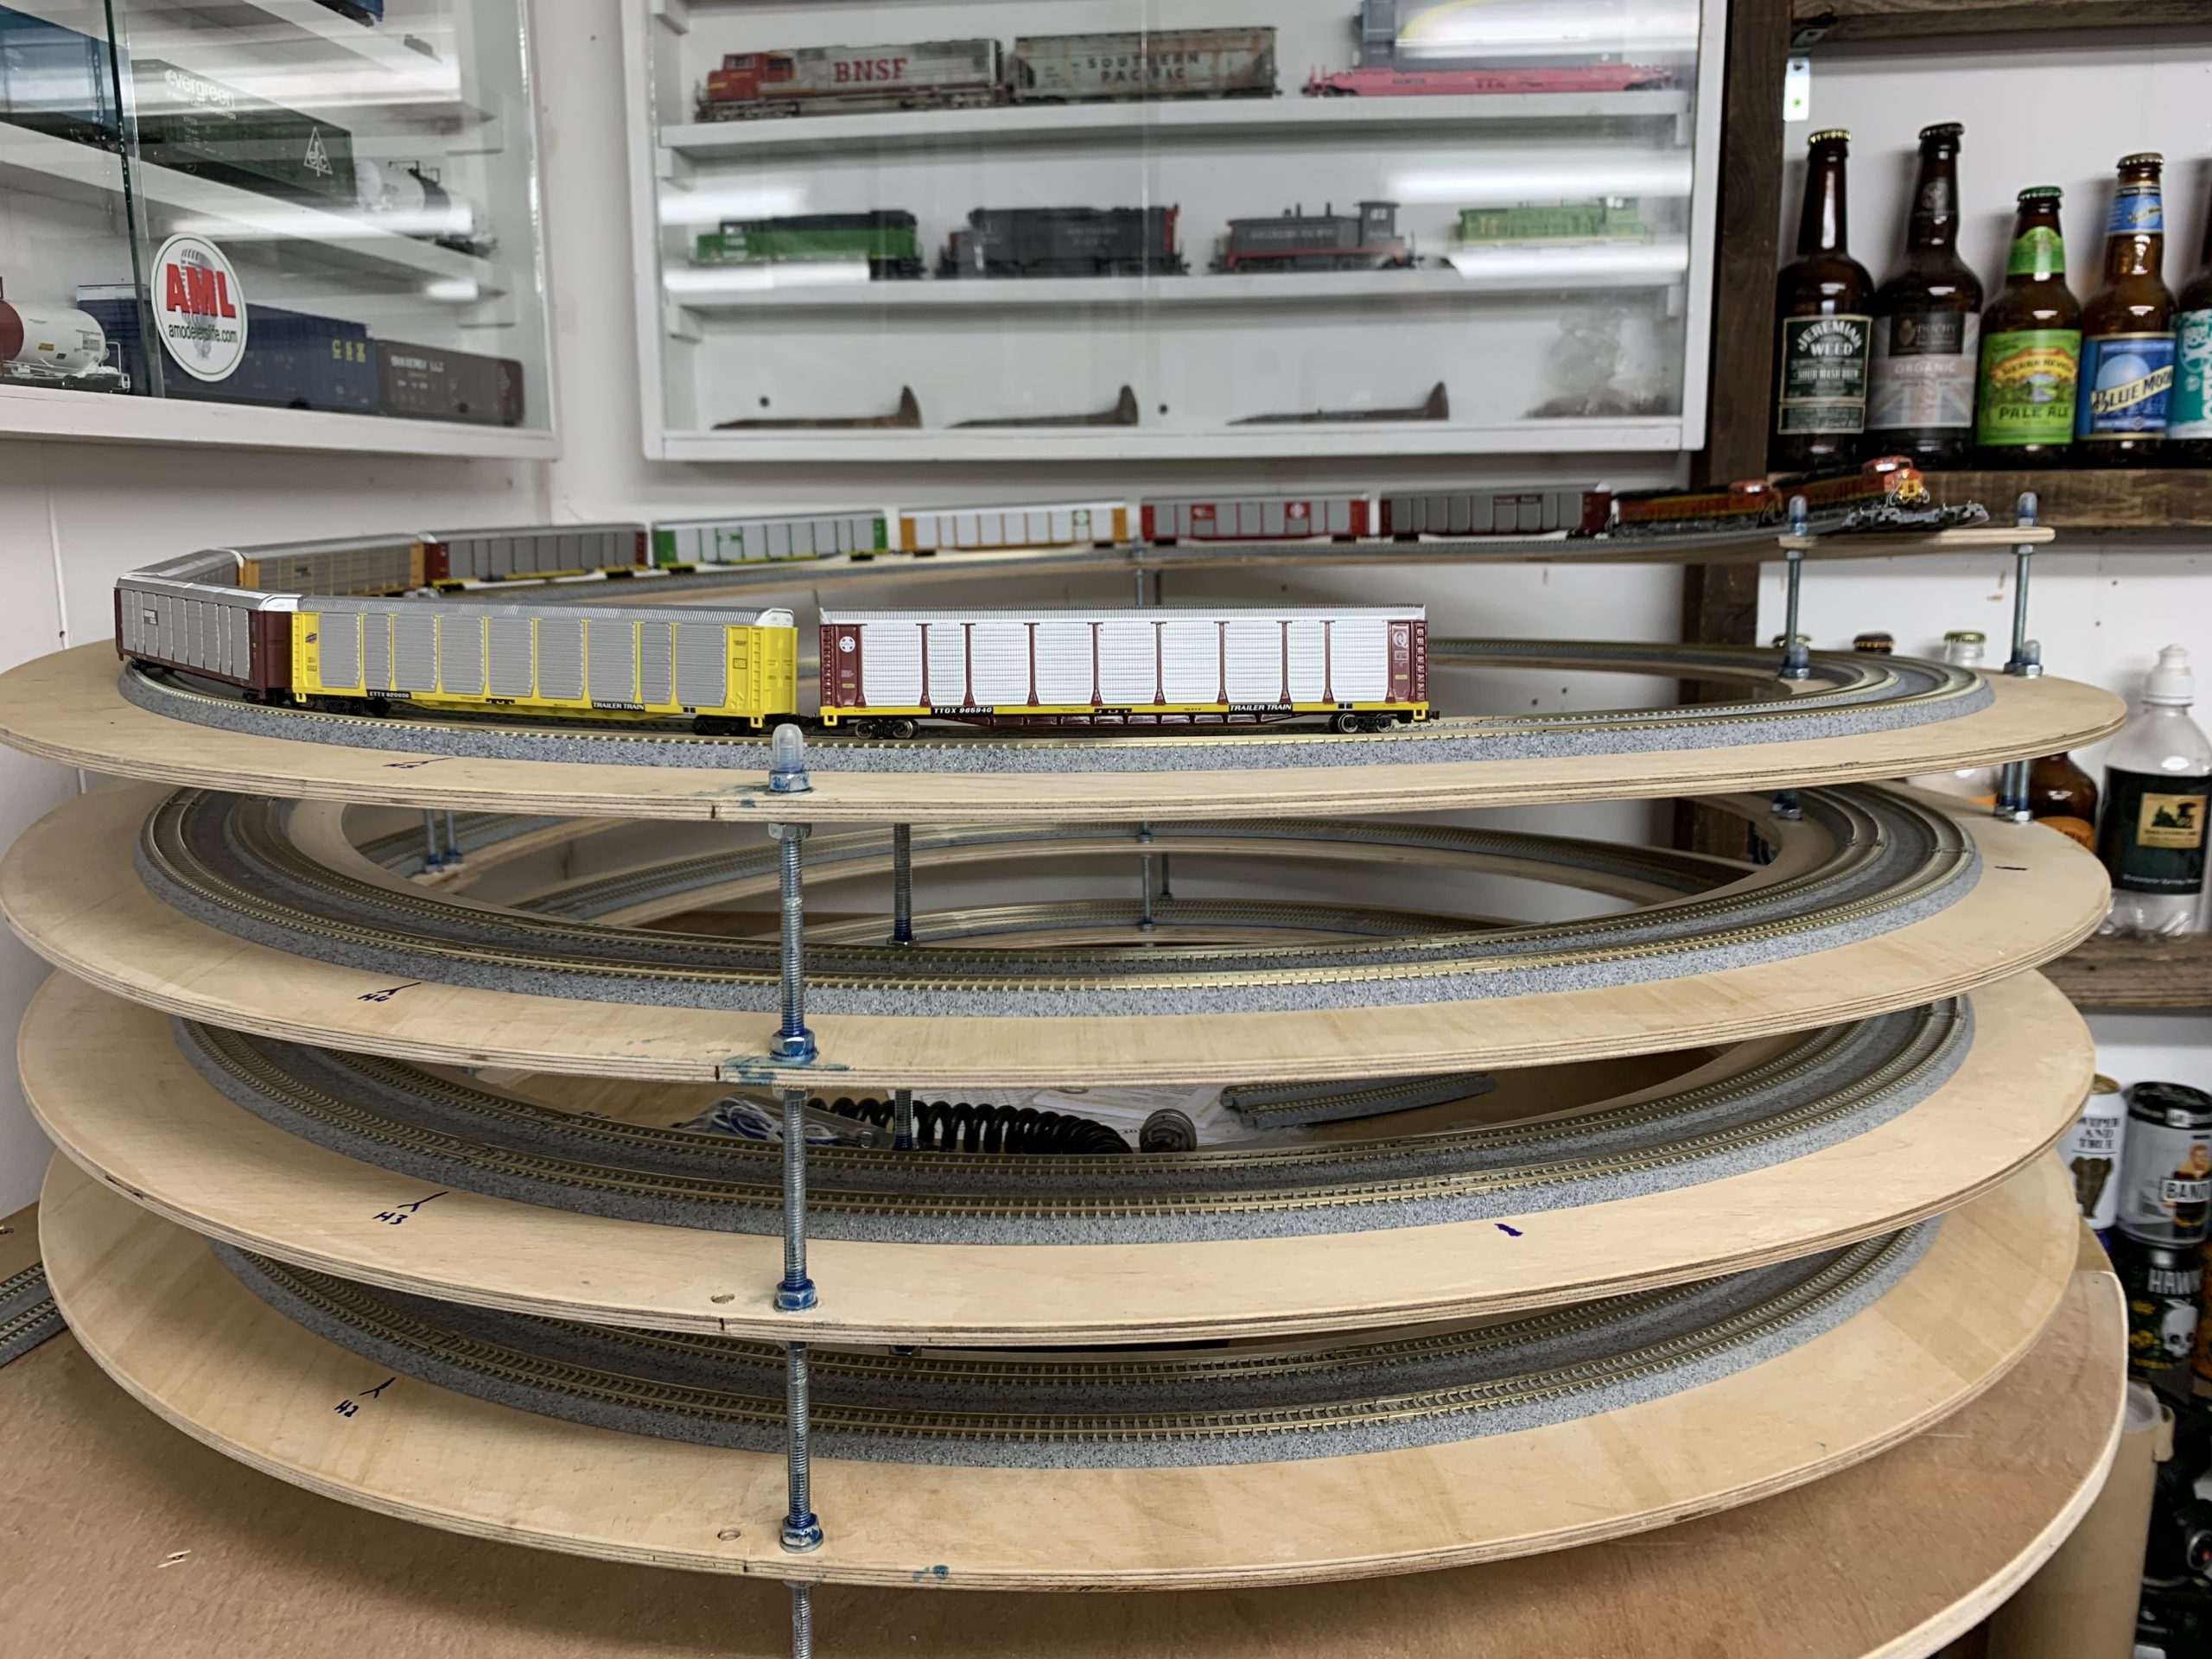 Quick Helix update BNSF Chicago Sub in N Scale